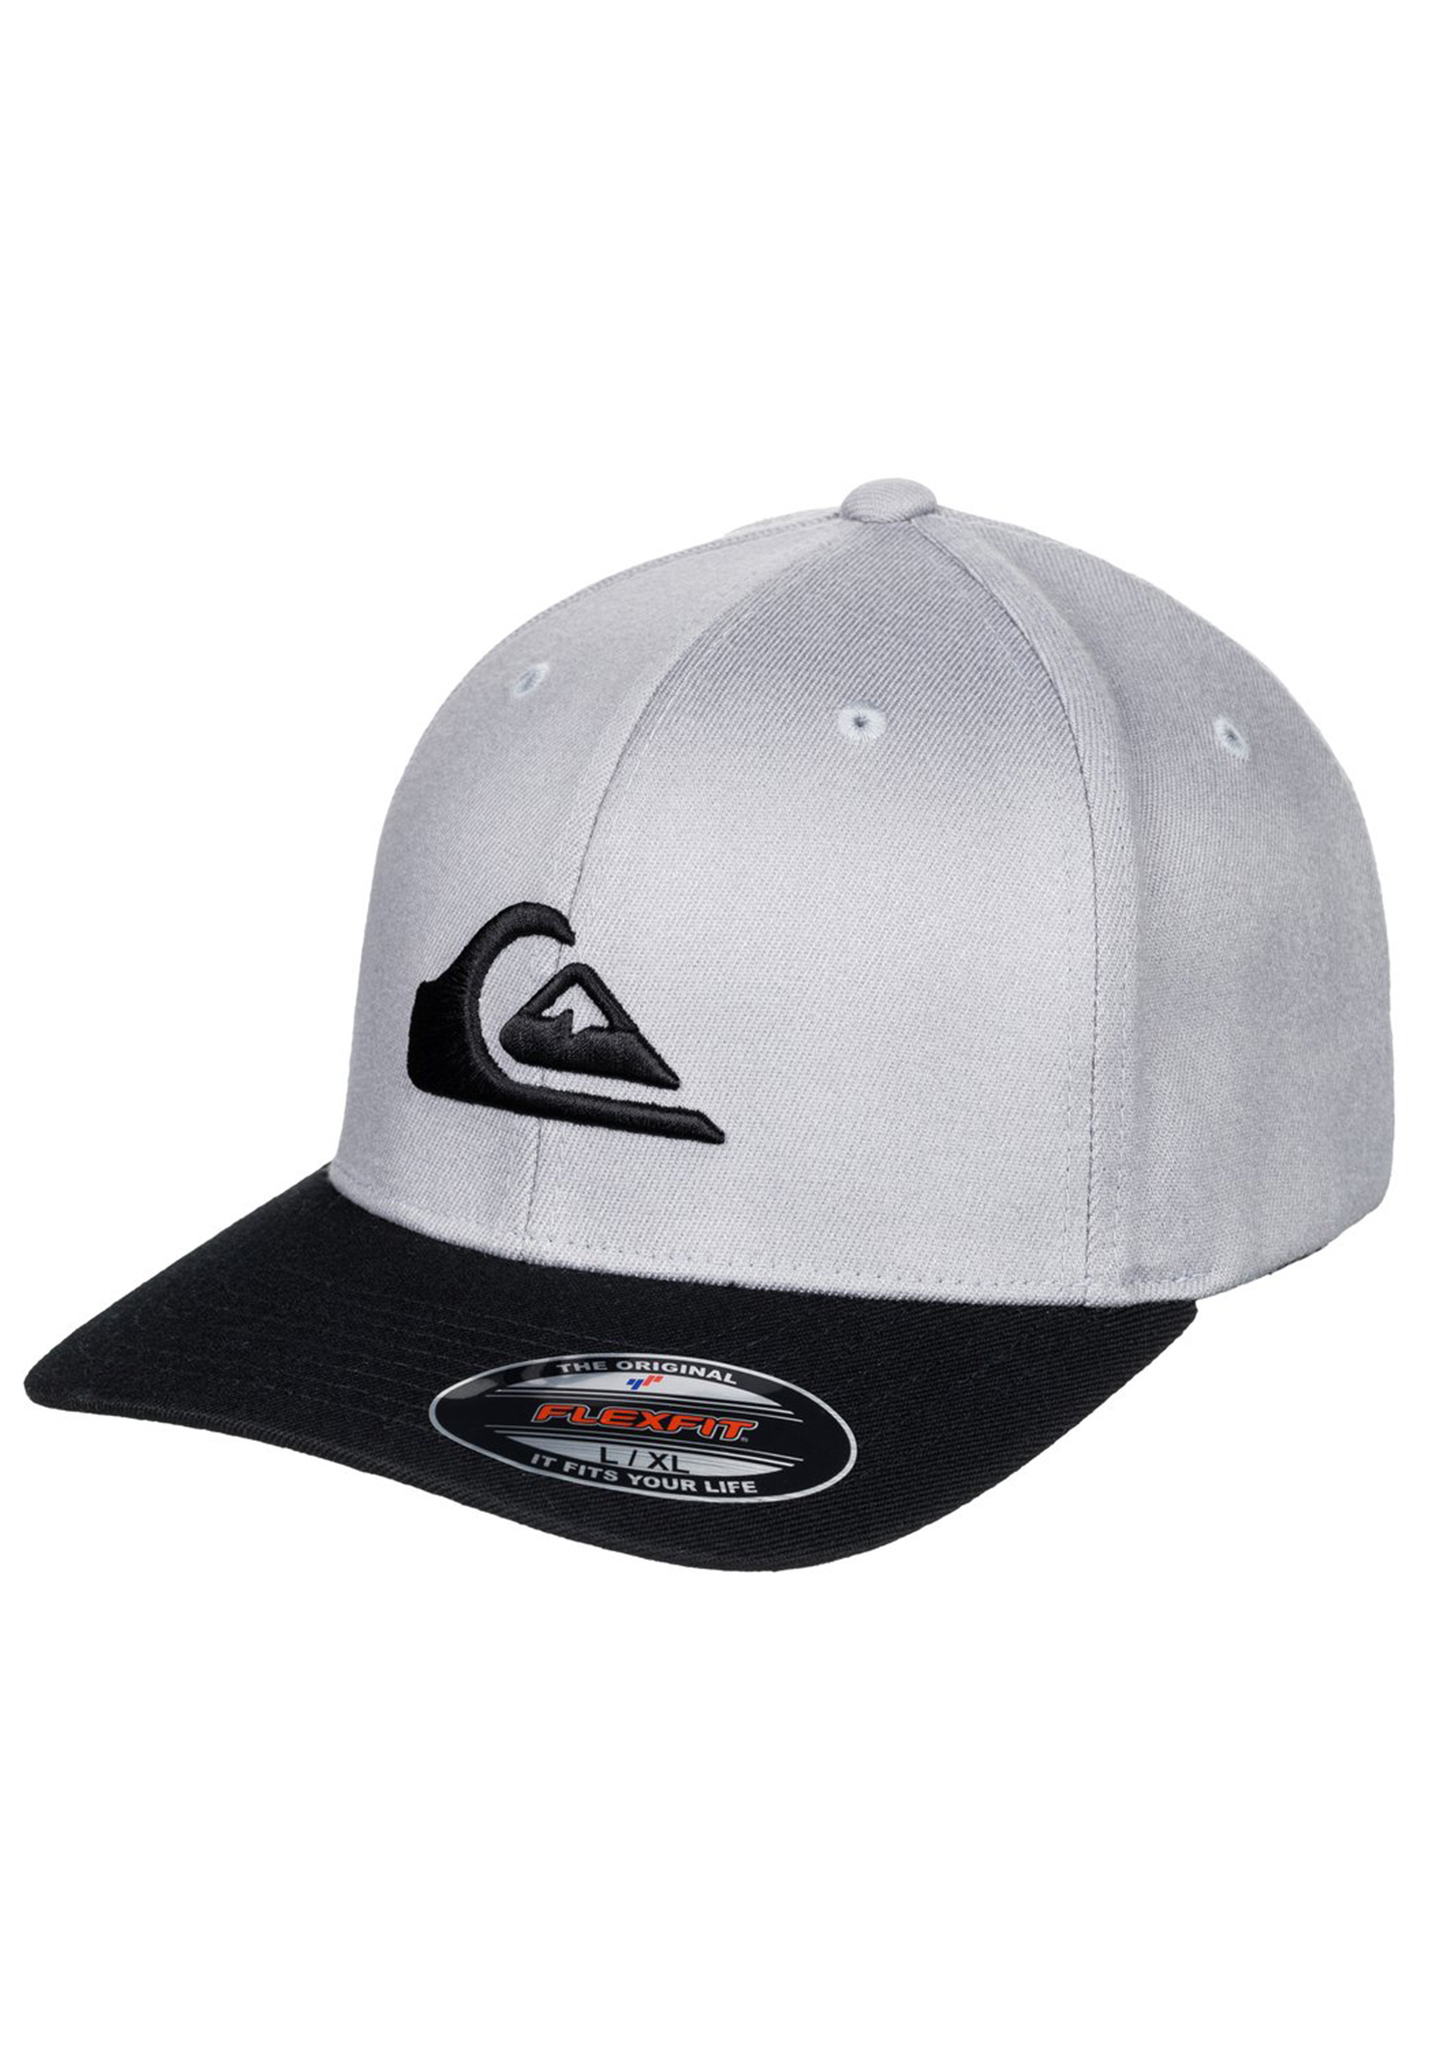 Quiksilver Mountain and Wave Strapback Cap graupel S/M